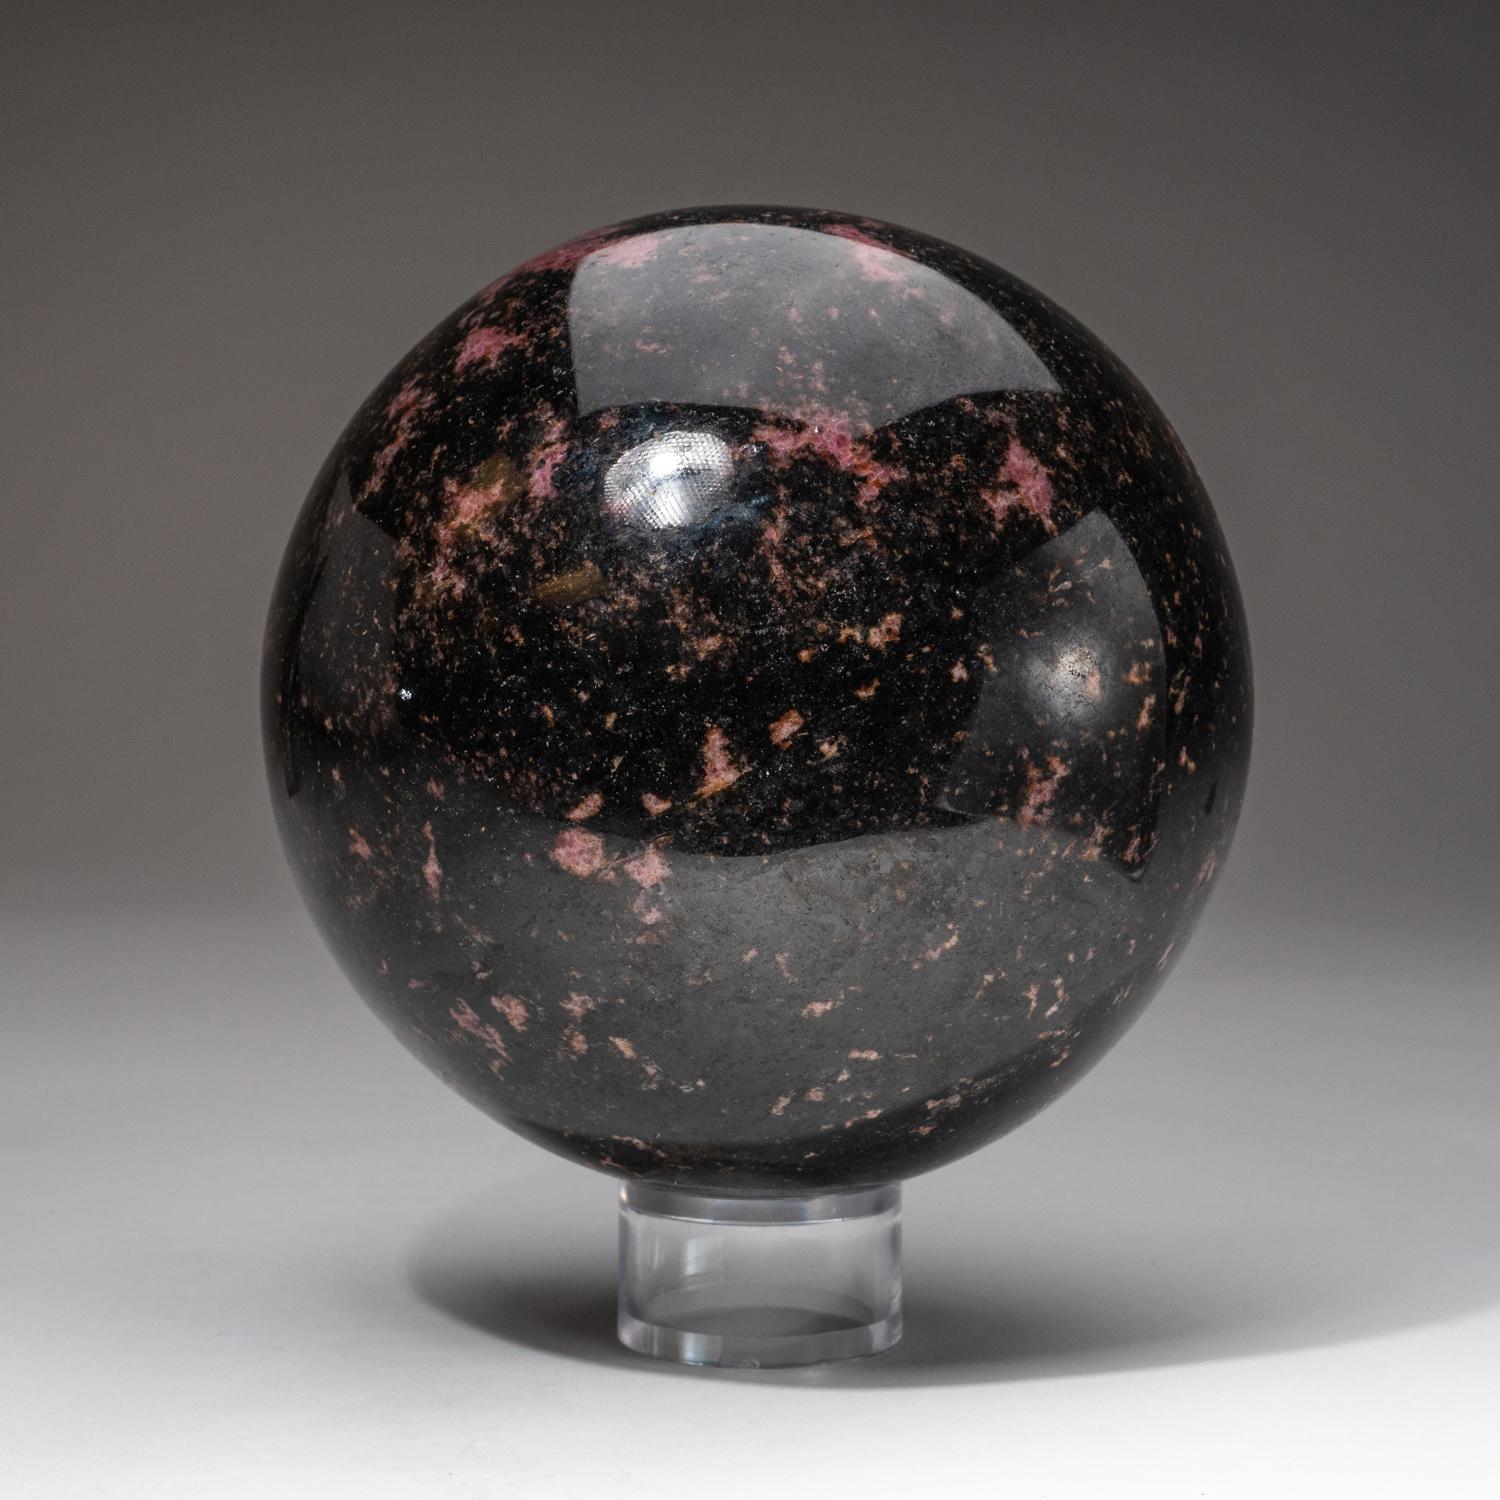 This top-quality hand-polished natural Imperial Rhodonite Sphere from Madagascar exhibits an exquisite pattern with vivid hues of pink and red. When used, the Rhodonite stone activates and balances the heart, clearing away past wounds and promoting